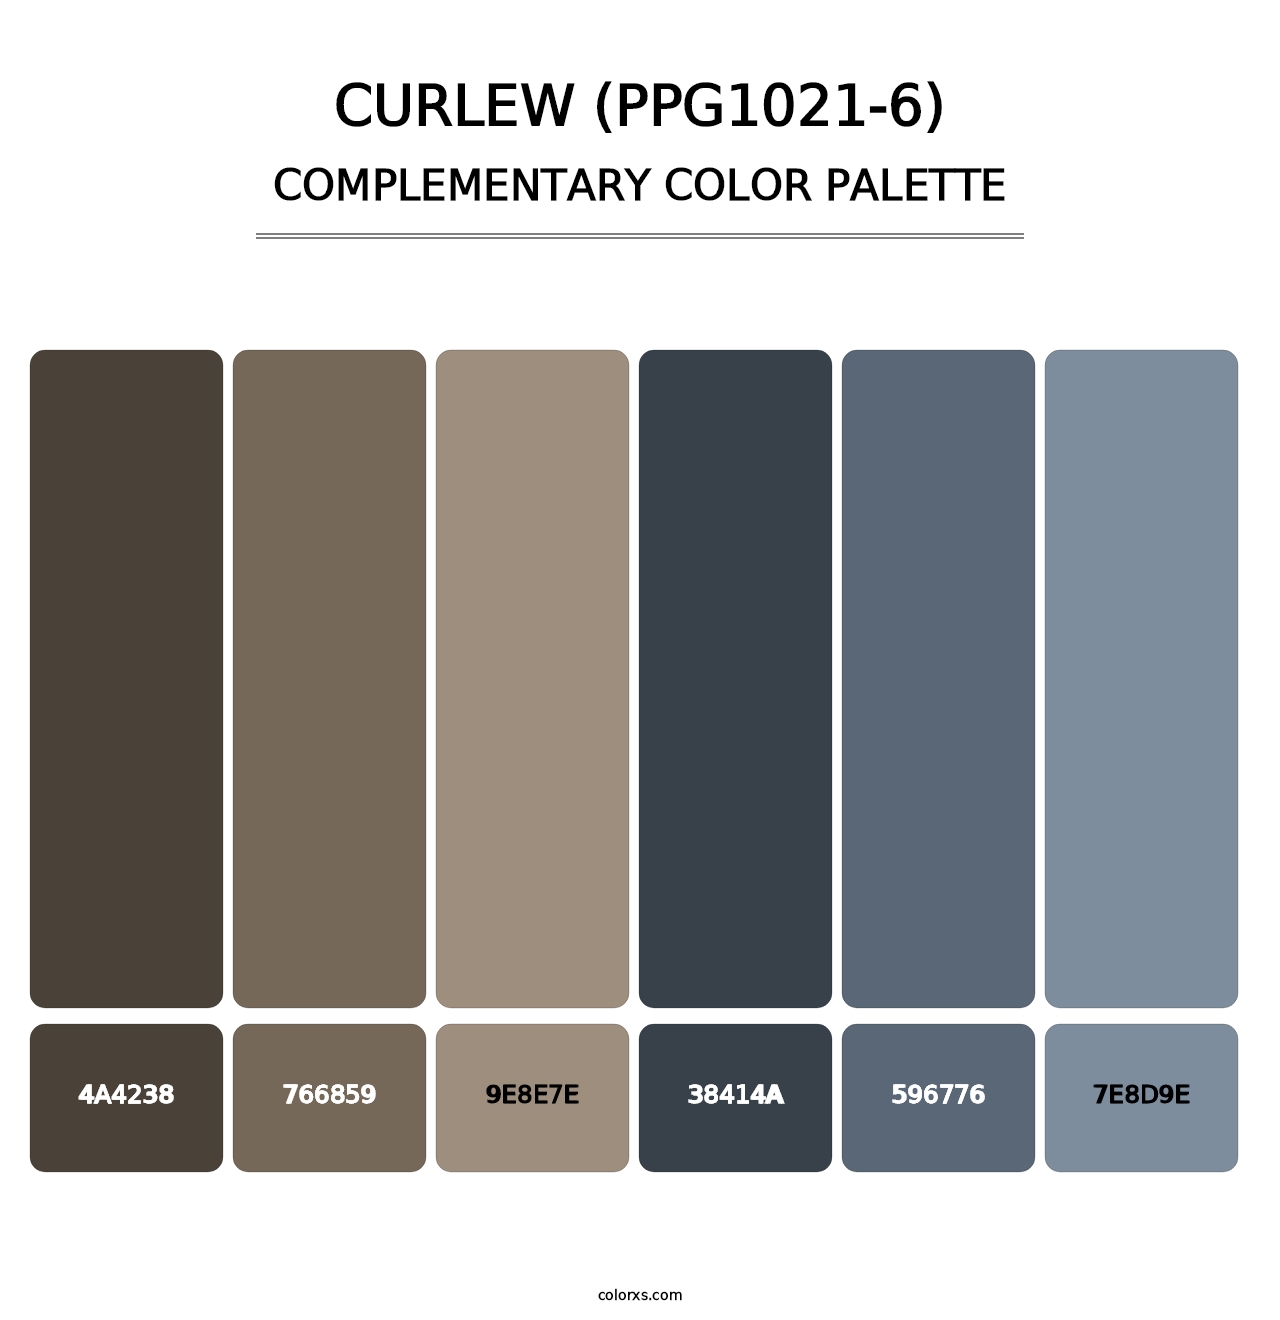 Curlew (PPG1021-6) - Complementary Color Palette